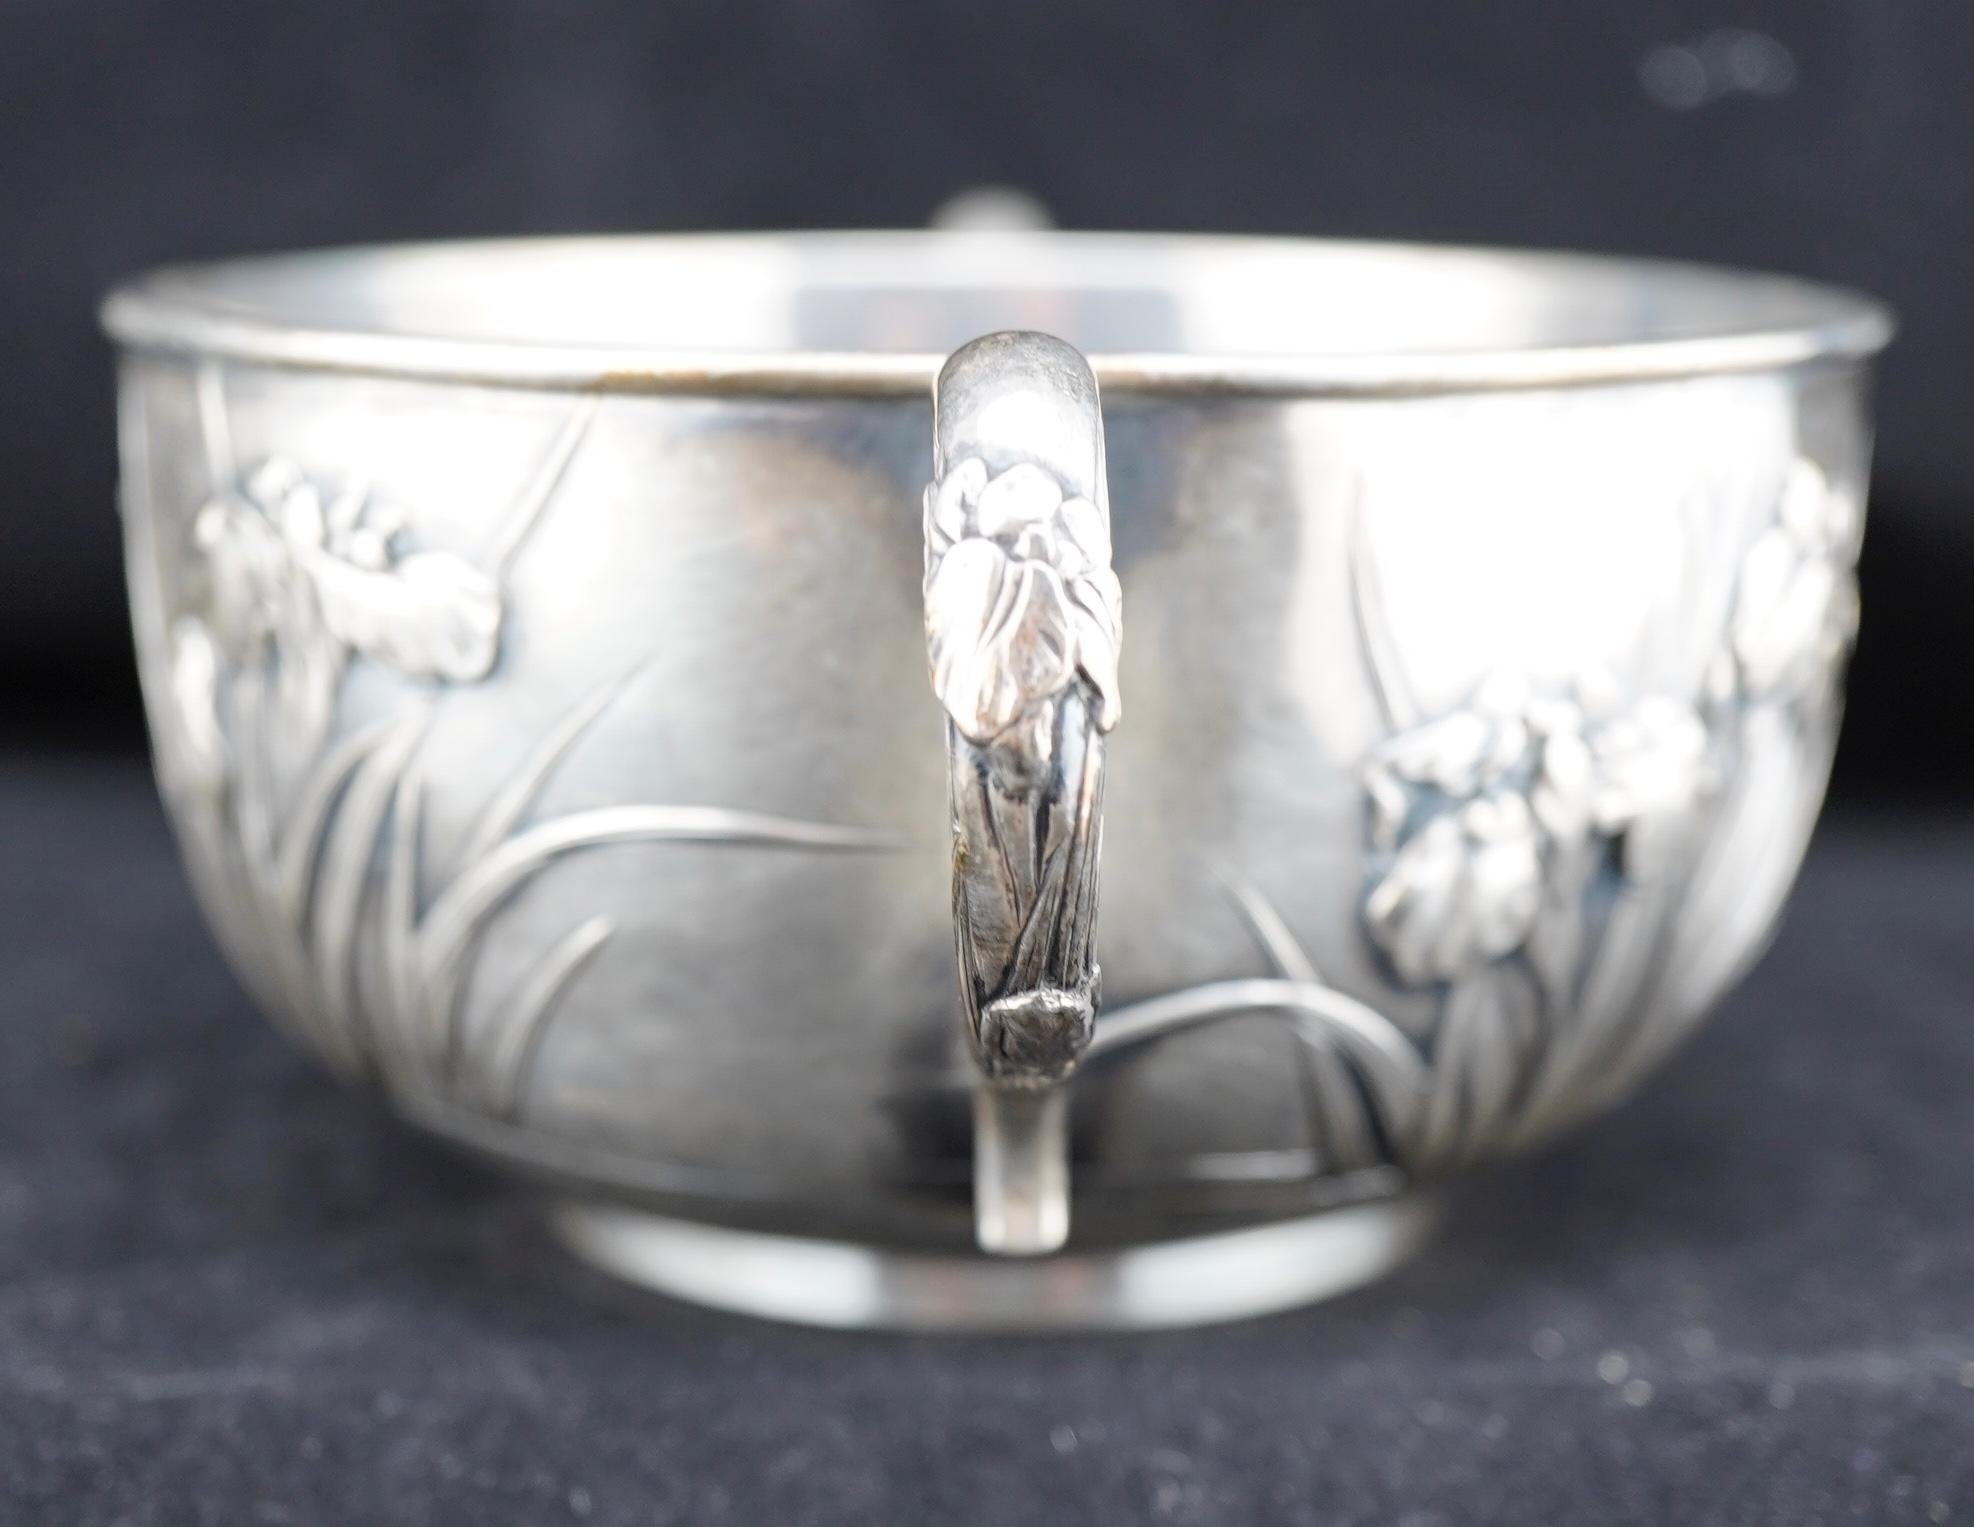 Japanese Silver Bowl with Irises by Konoike, Meji Period In Excellent Condition For Sale In Gainesville, FL